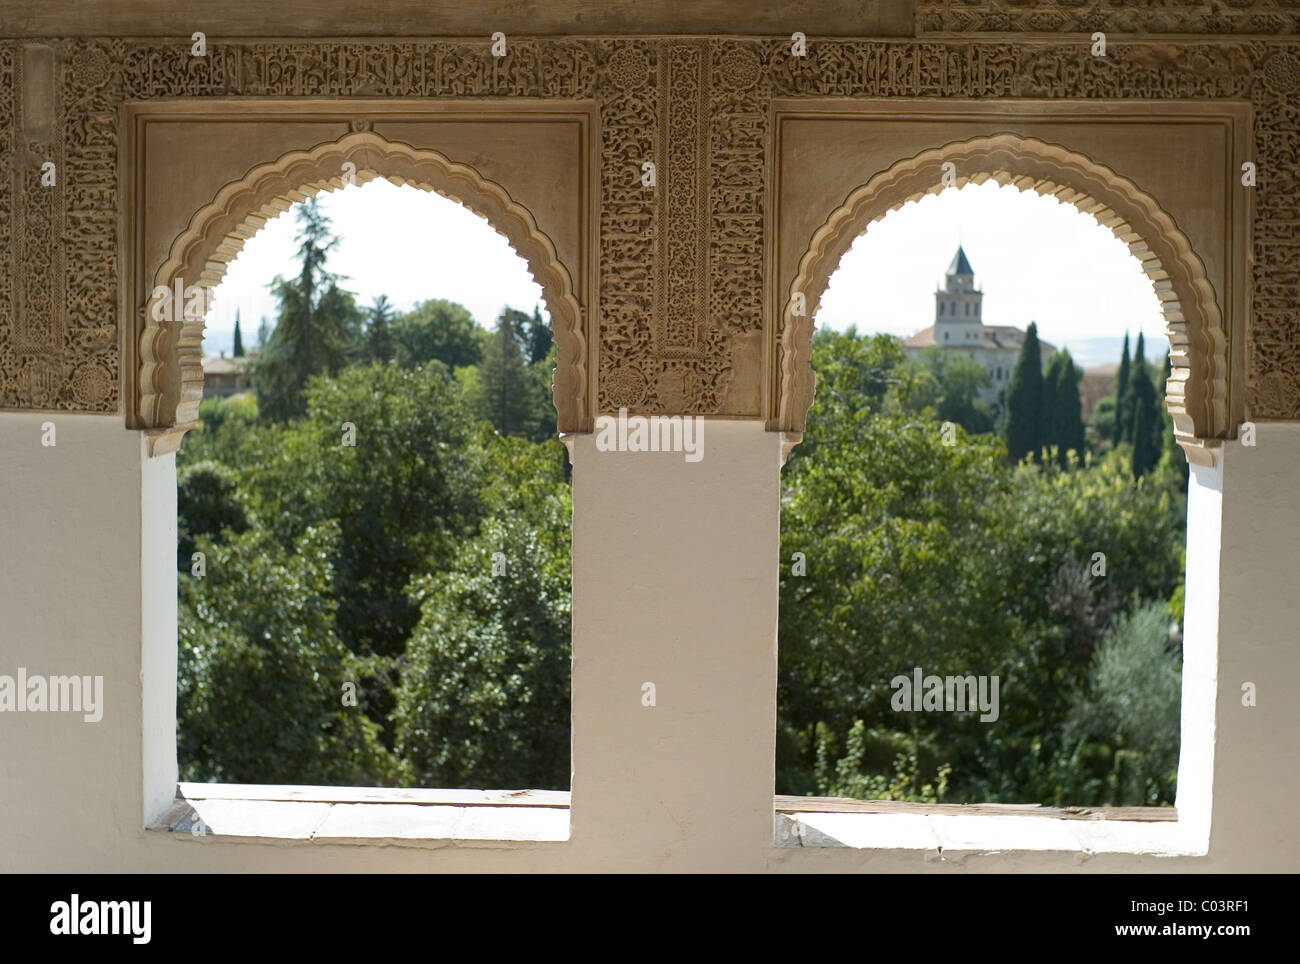 Overlooking the gardens of the Alhambra Palace, Granada, Spain Stock Photo